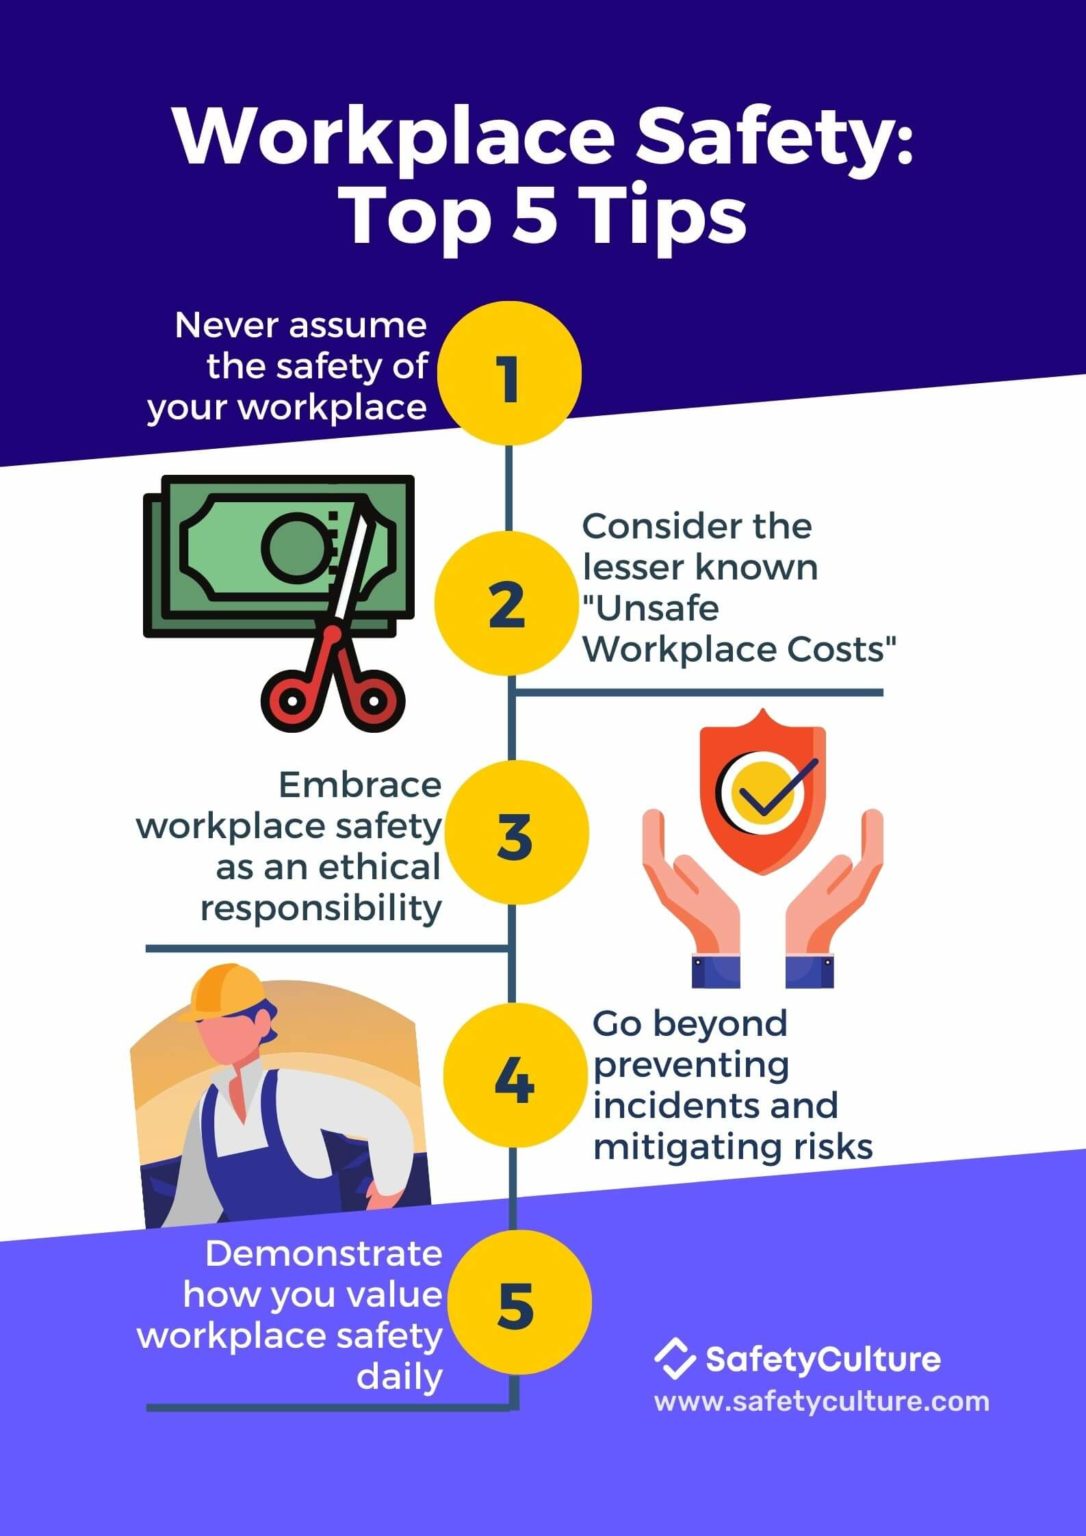 Workplace Safety Tips: Top 5 from Experts | SafetyCulture ...